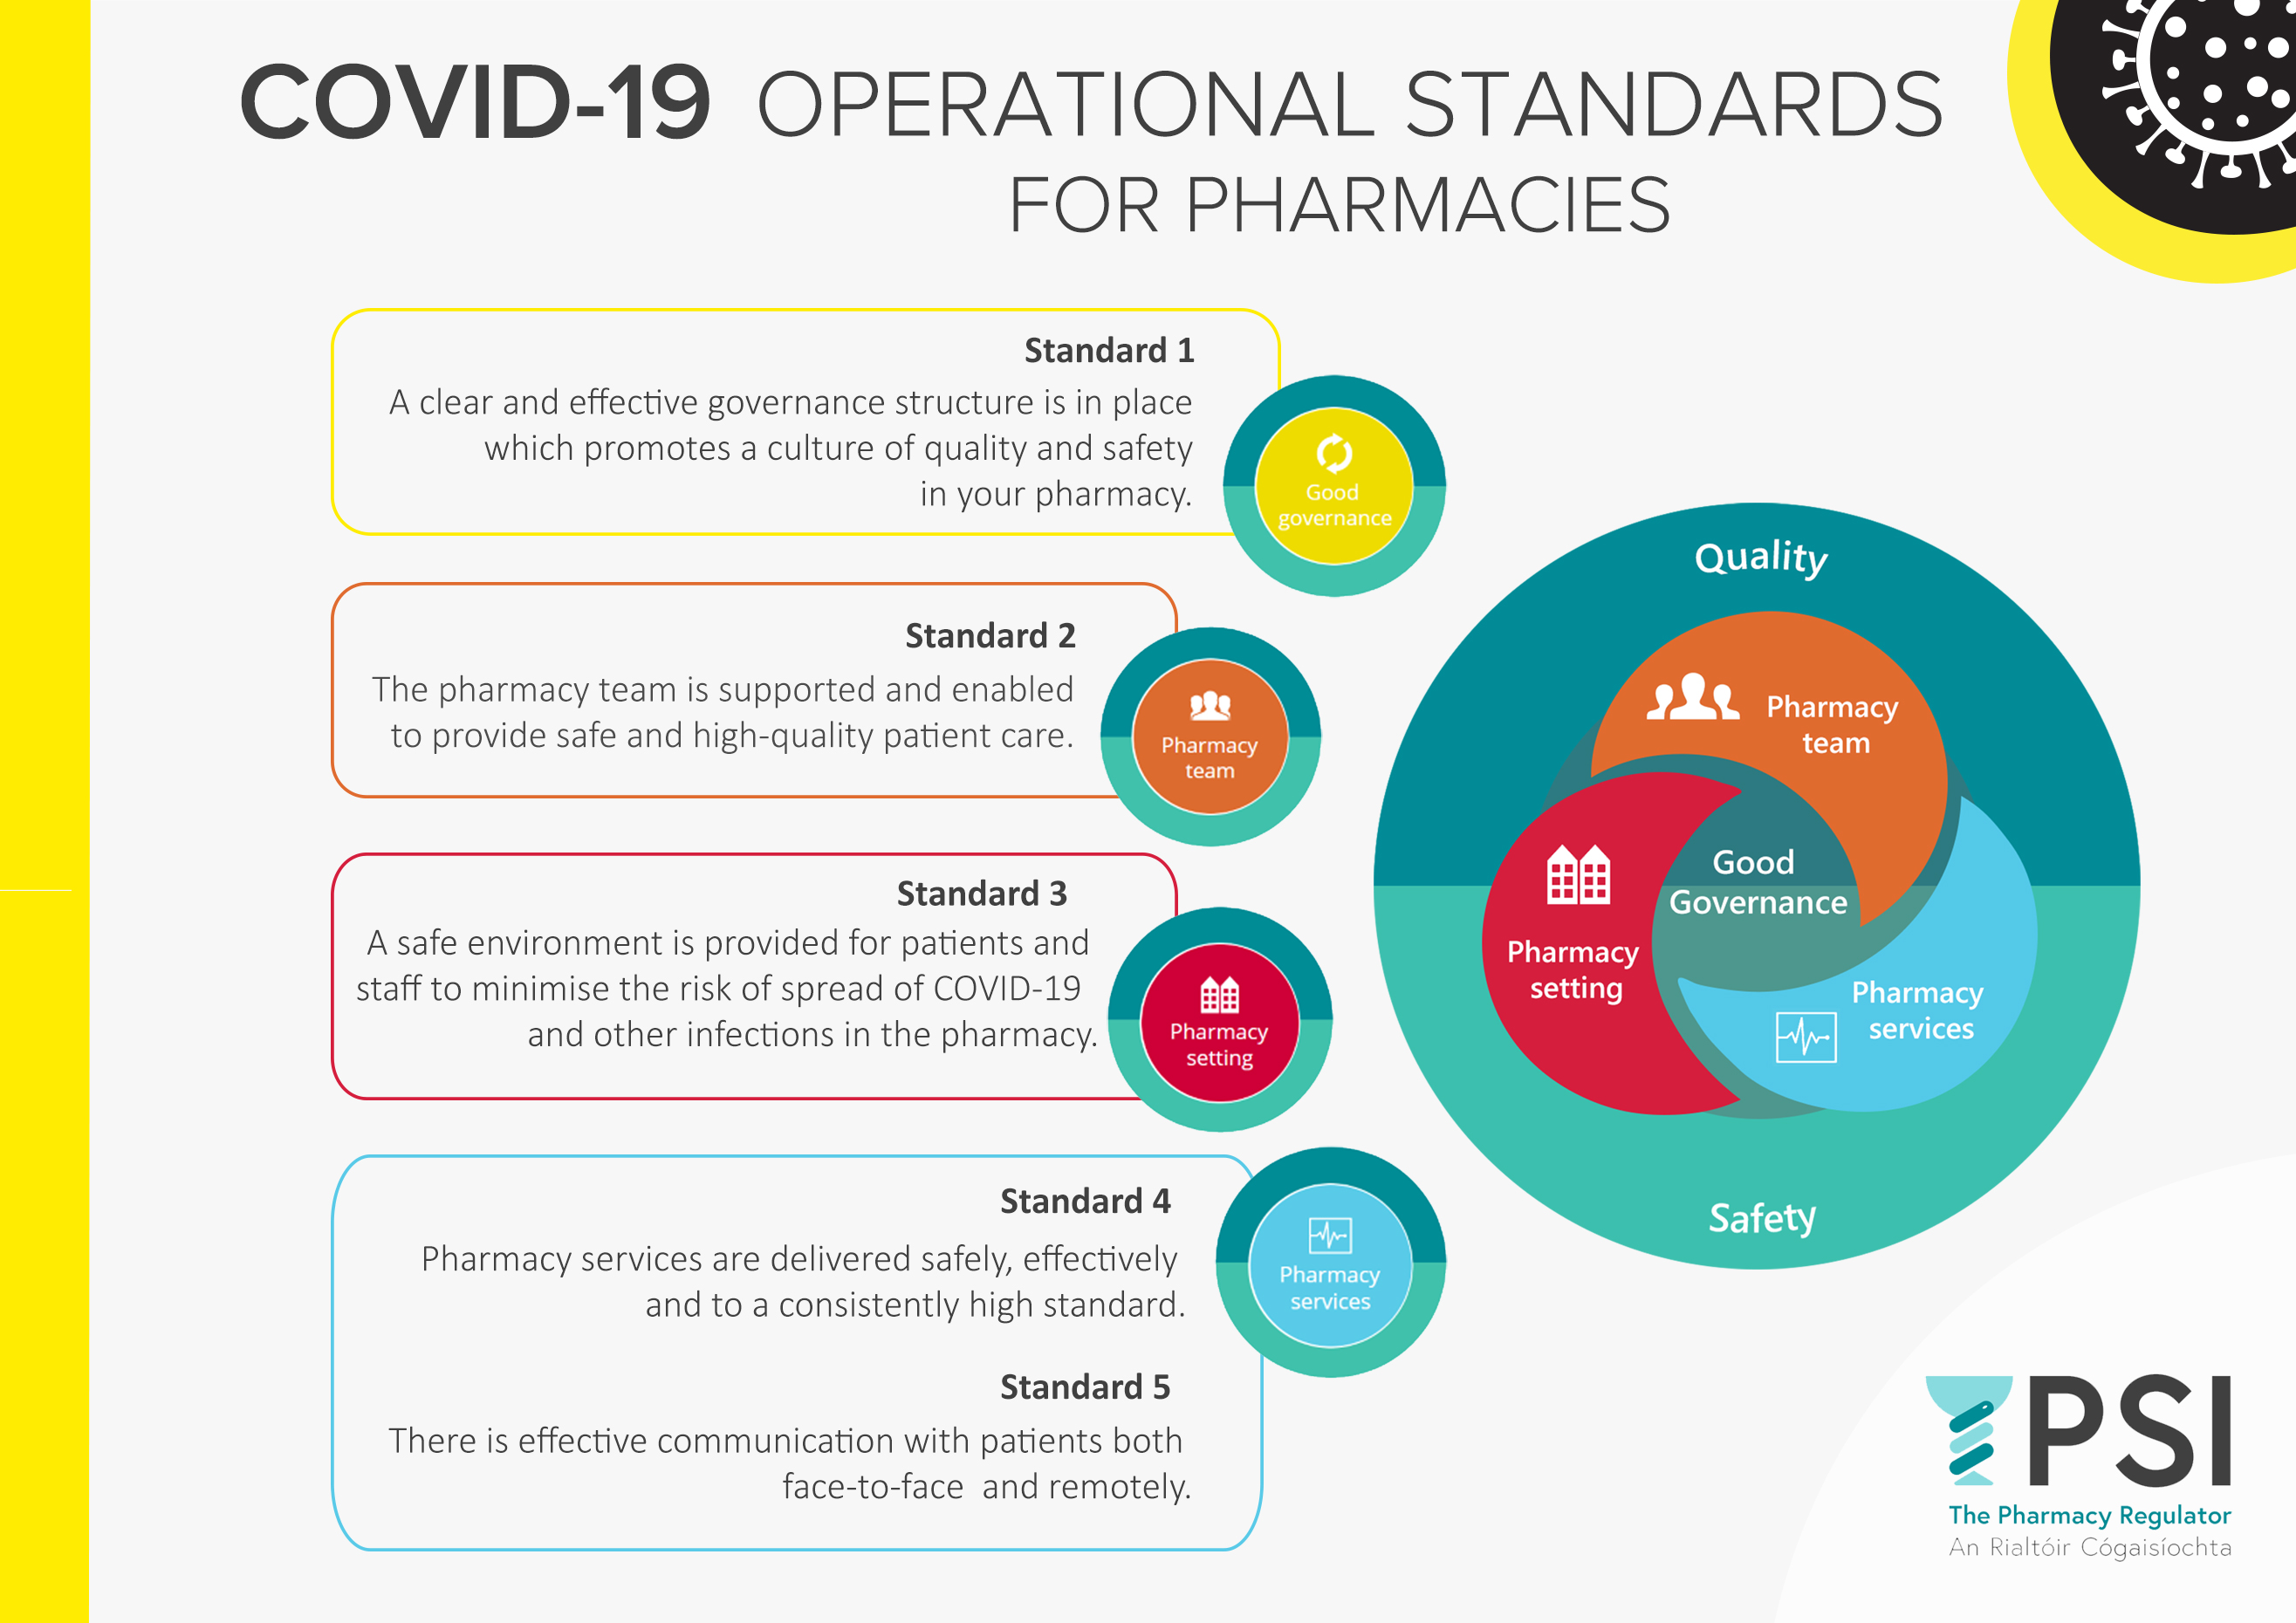 View the poster on the COVID-19 Operational Standards